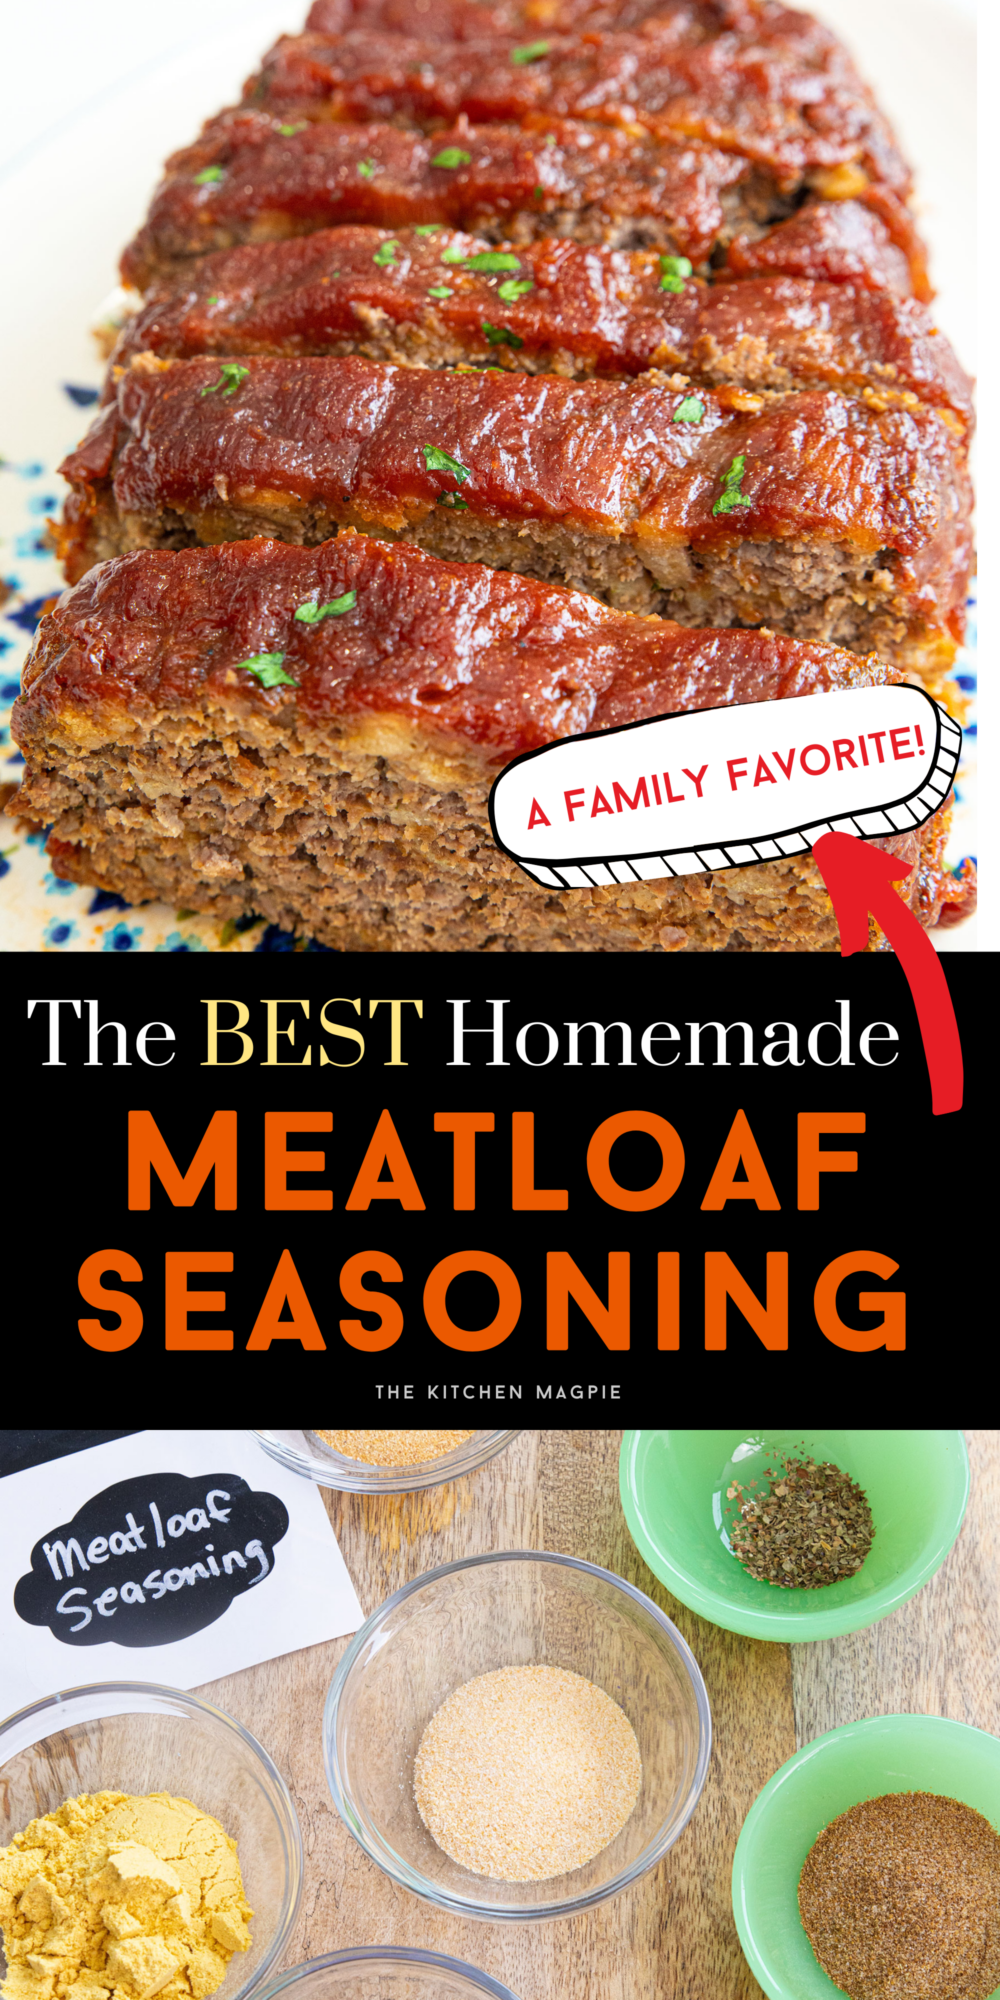 Delicious homemade meatloaf seasoning, perfect for all meatloaf recipes! Add in a couple of teaspoons per meatloaf to amp up the flavor.